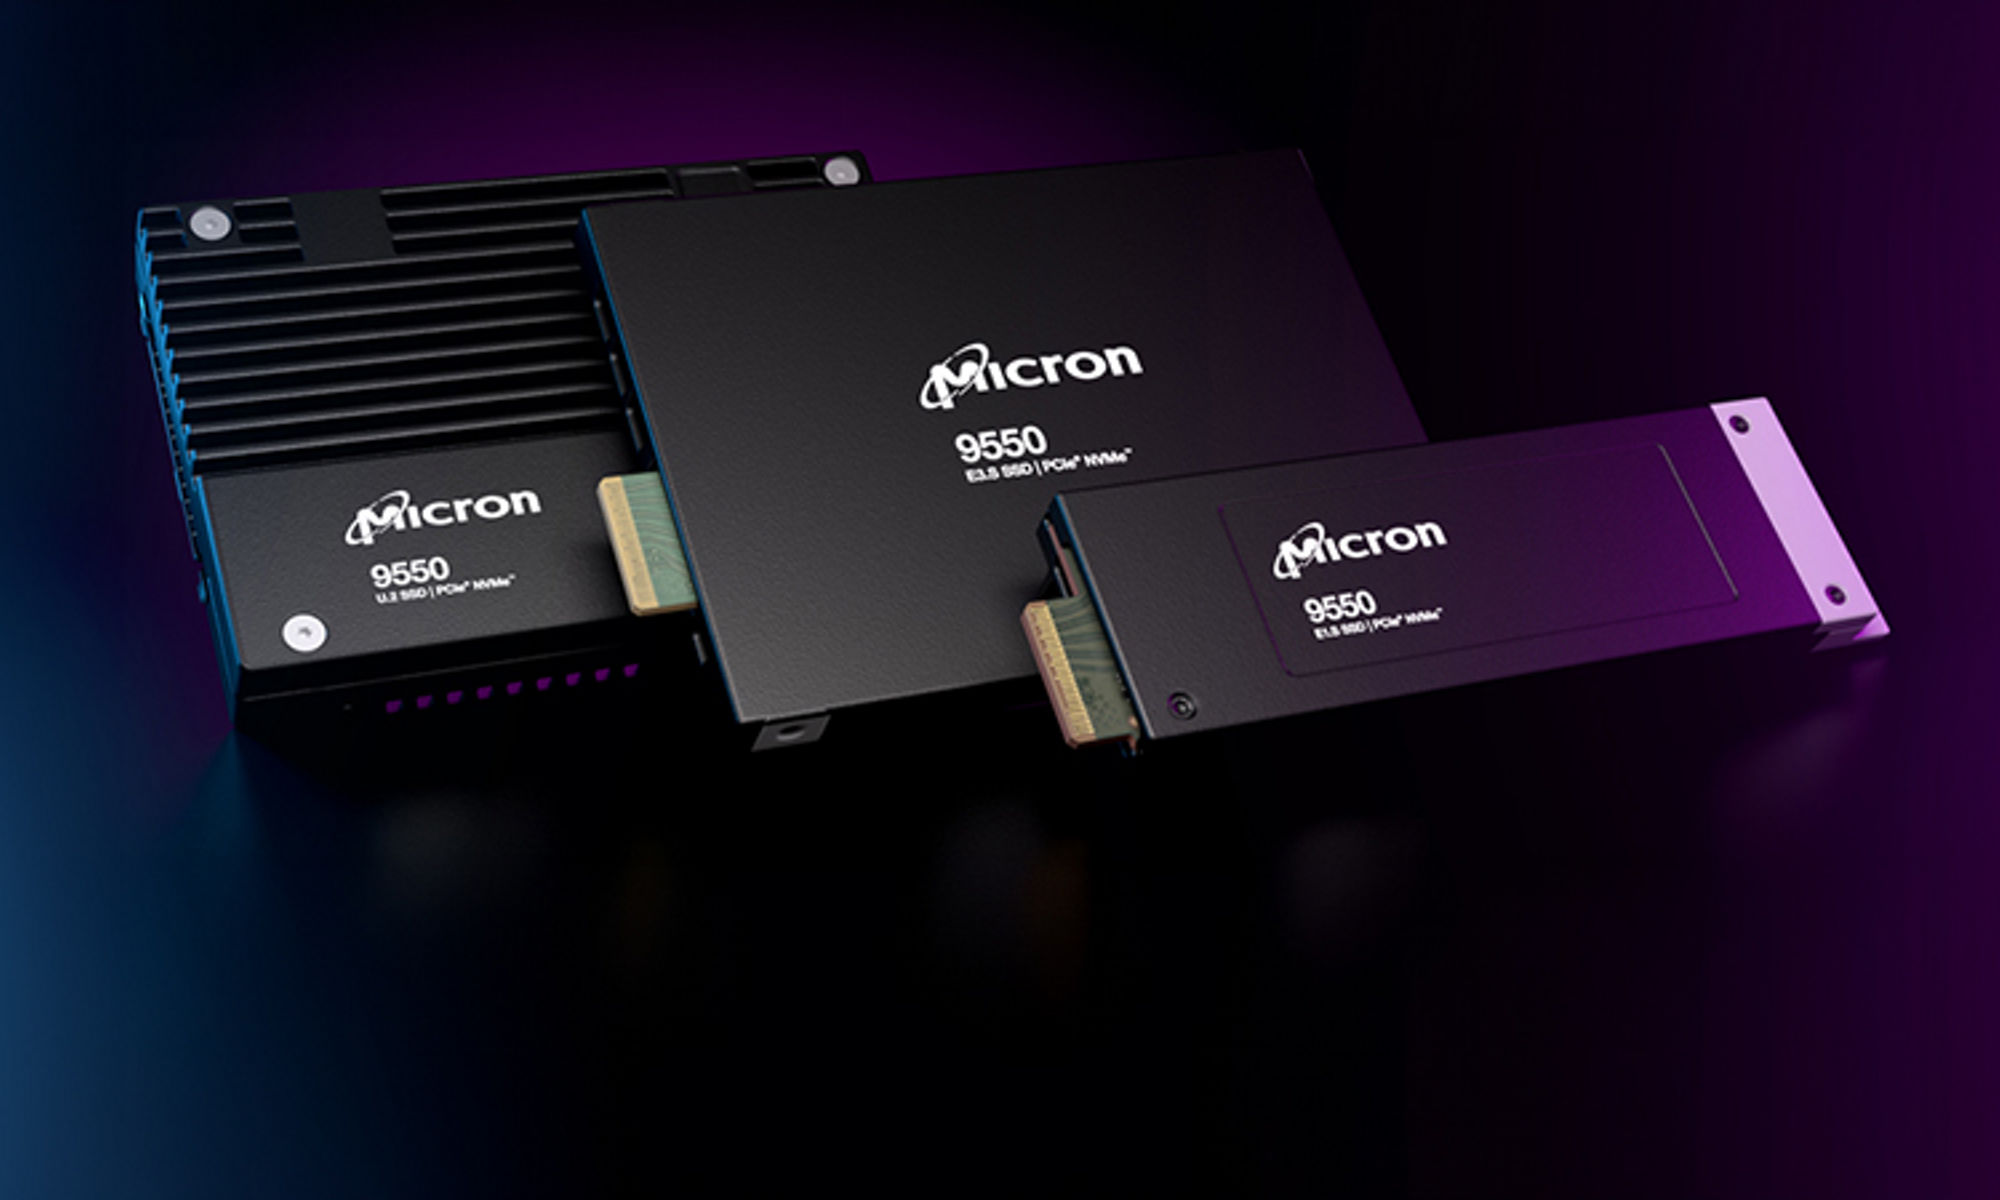 3 Micron 9550 SSD products horizontally displayed against a black and purple gradient background